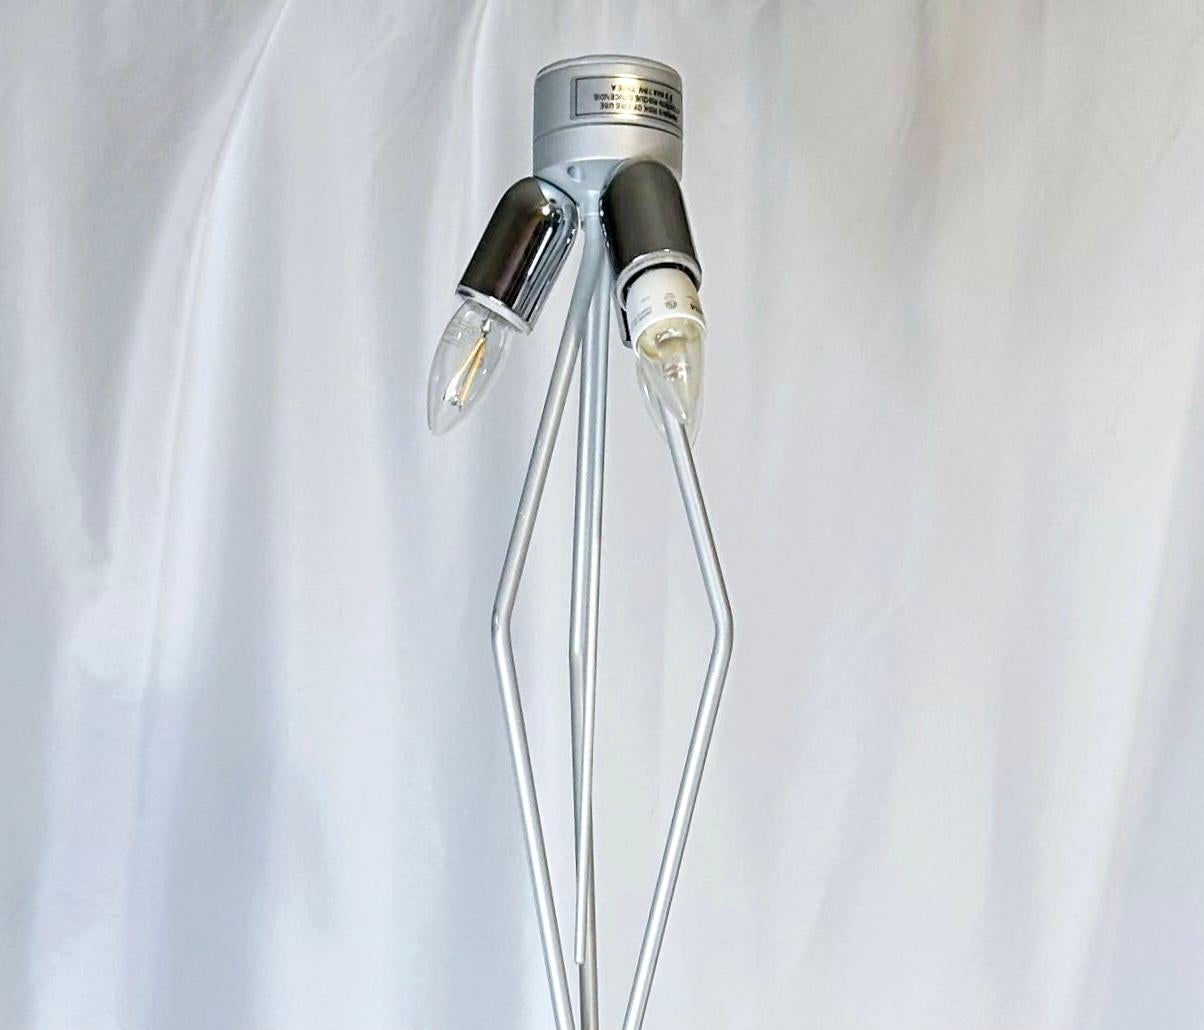 Artemide logico intuitive floor lamp with hand-blown glass  For Sale 3